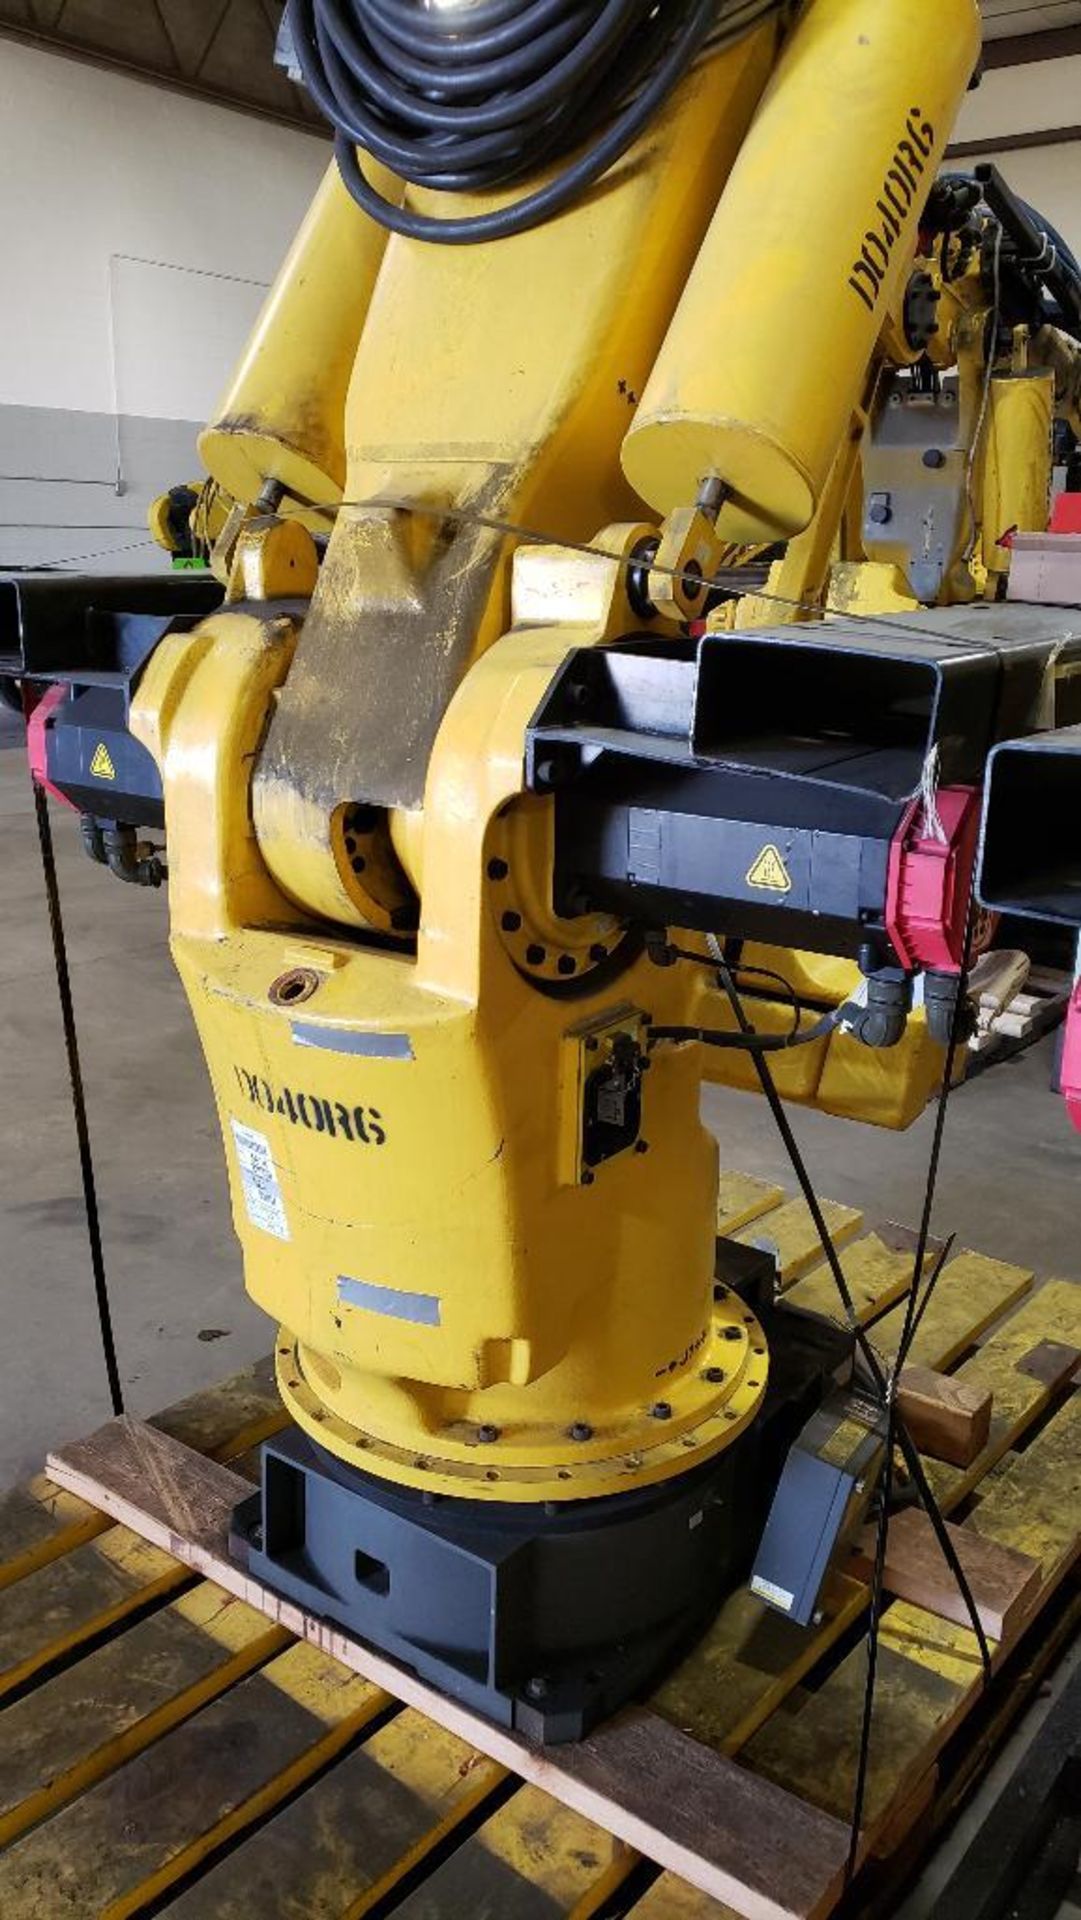 Fanuc S-420iW robot 6-axis arm. - Image 6 of 9